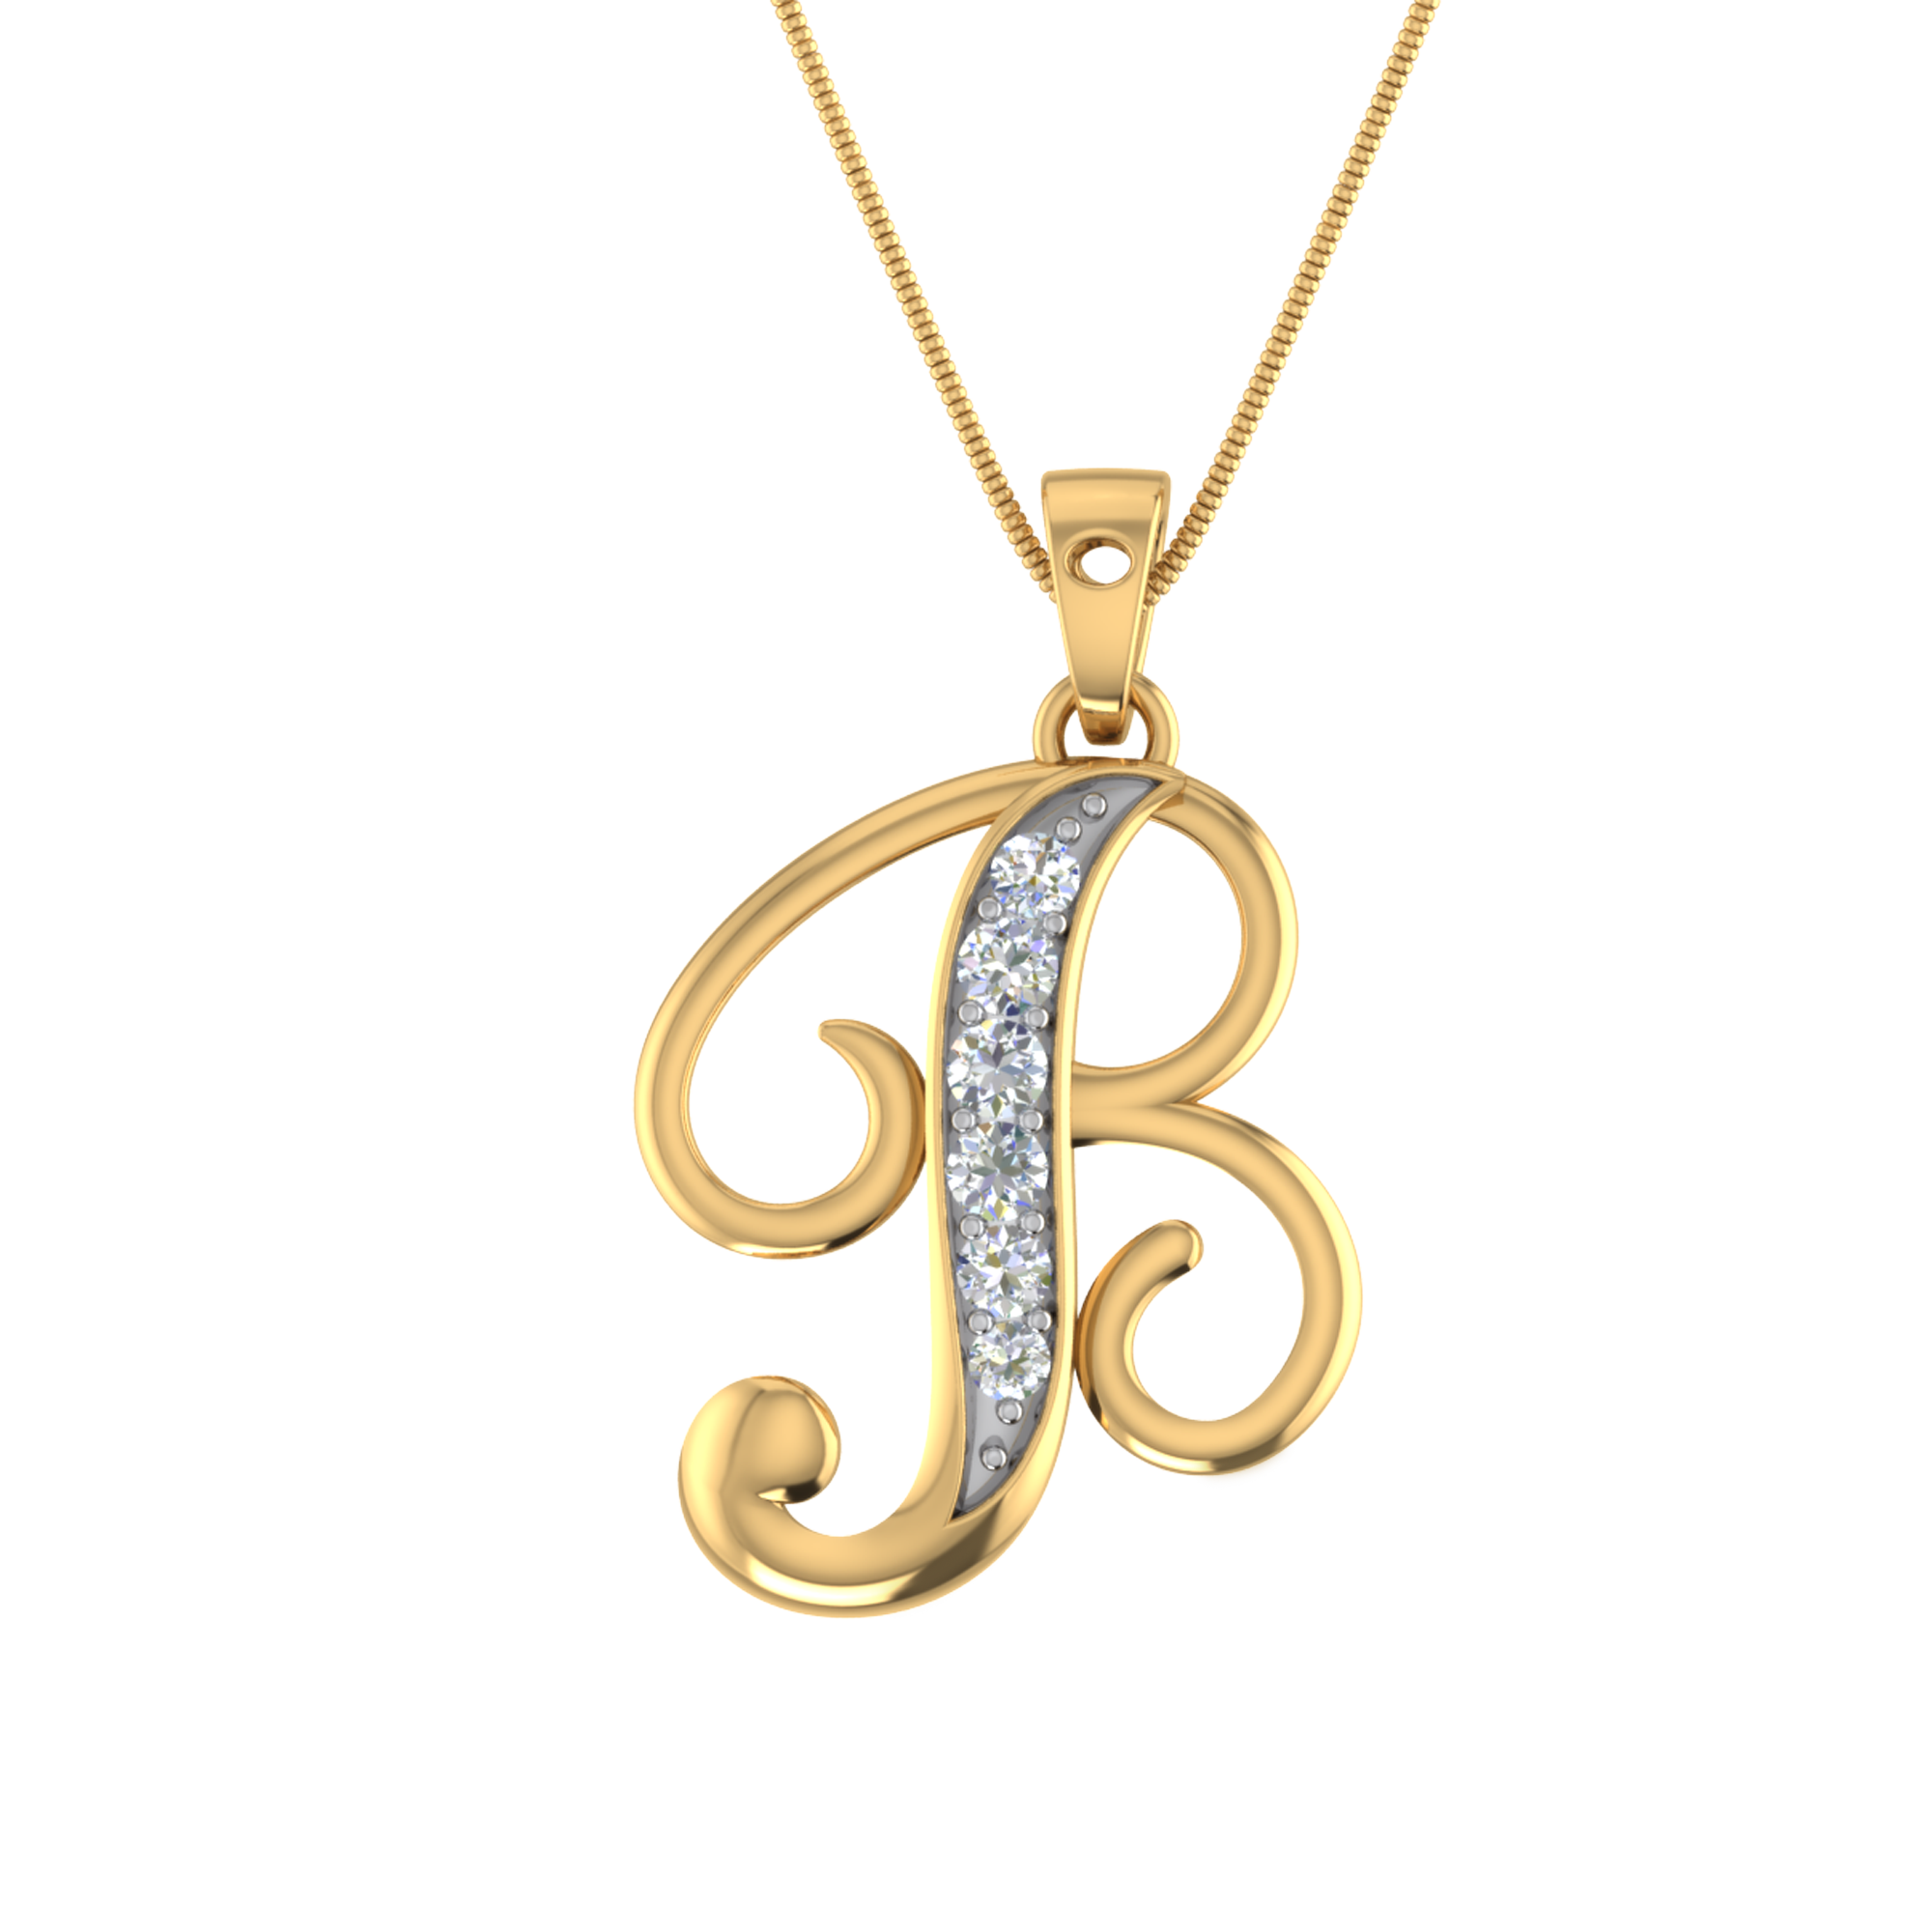 Initial B Pendant 2062: quality jewelry at TRAXNYC - buy online, best price  in NYC!